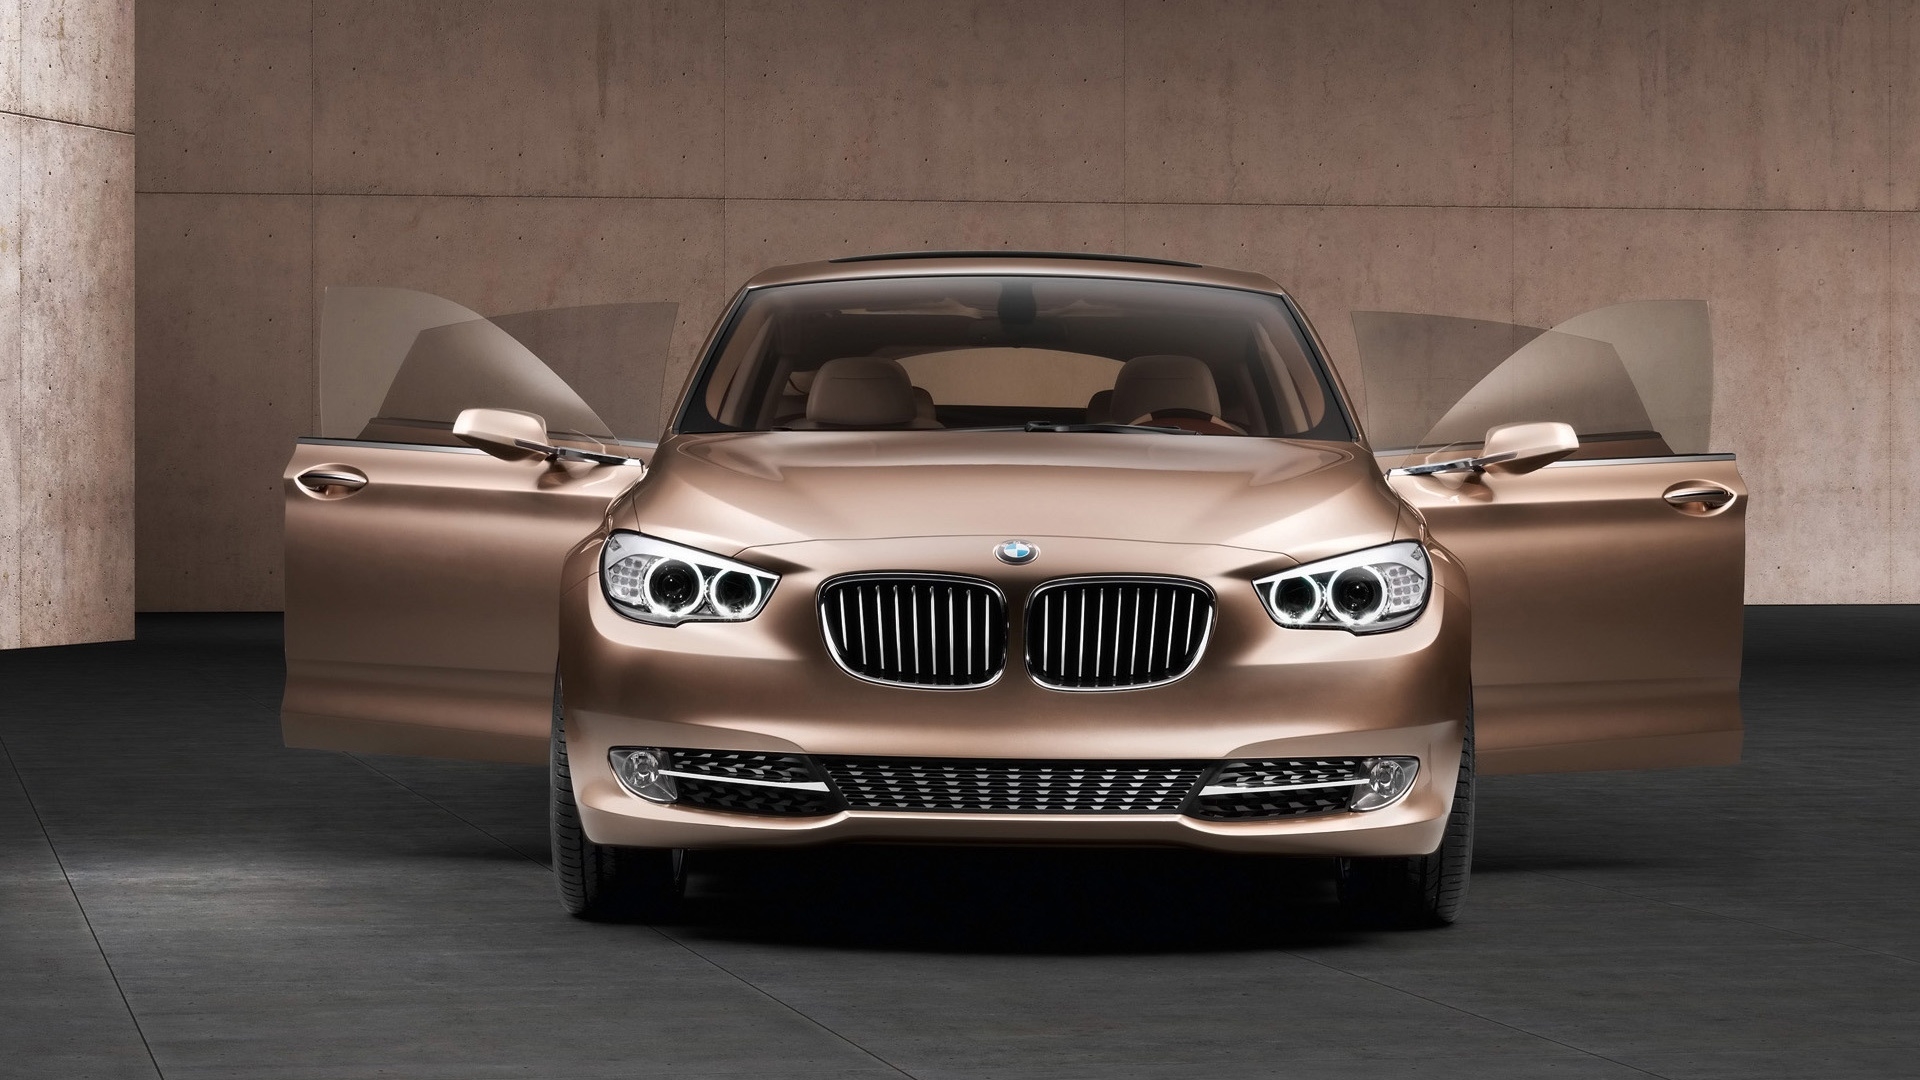 BMW Concept 5 Series Gran Turismo Front Open Doors 2009 for 1920 x 1080 HDTV 1080p resolution